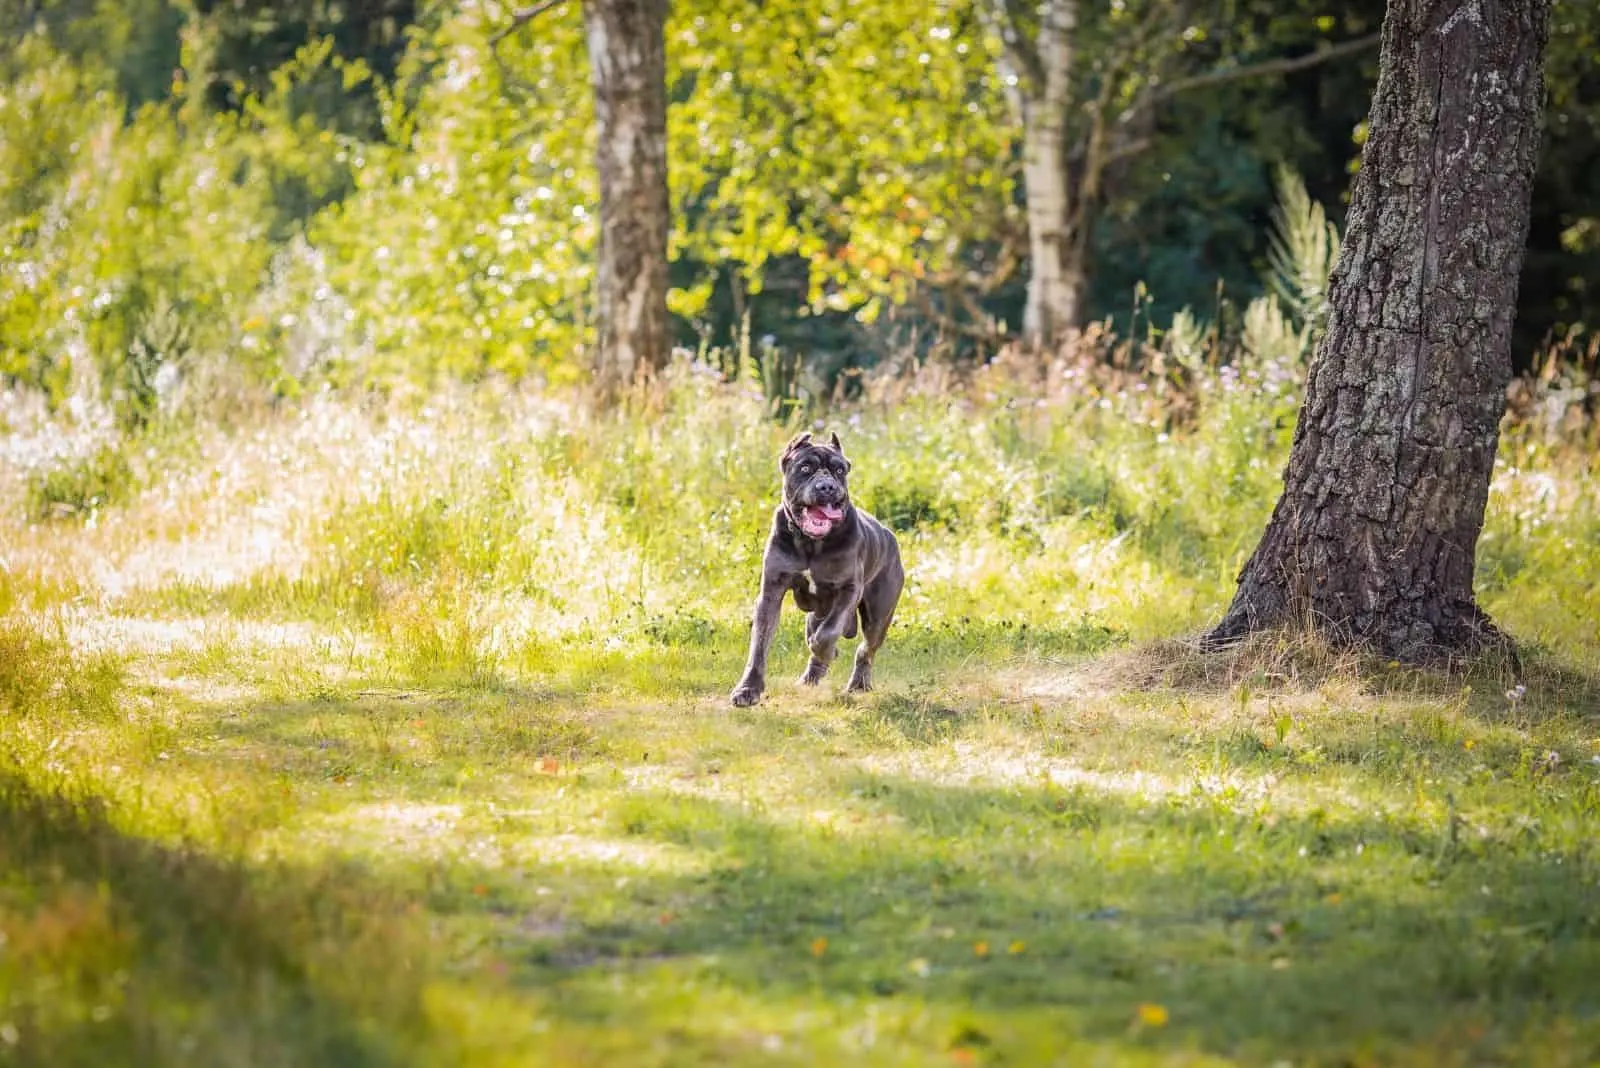 cane corso exercising in the forest/ lawn 